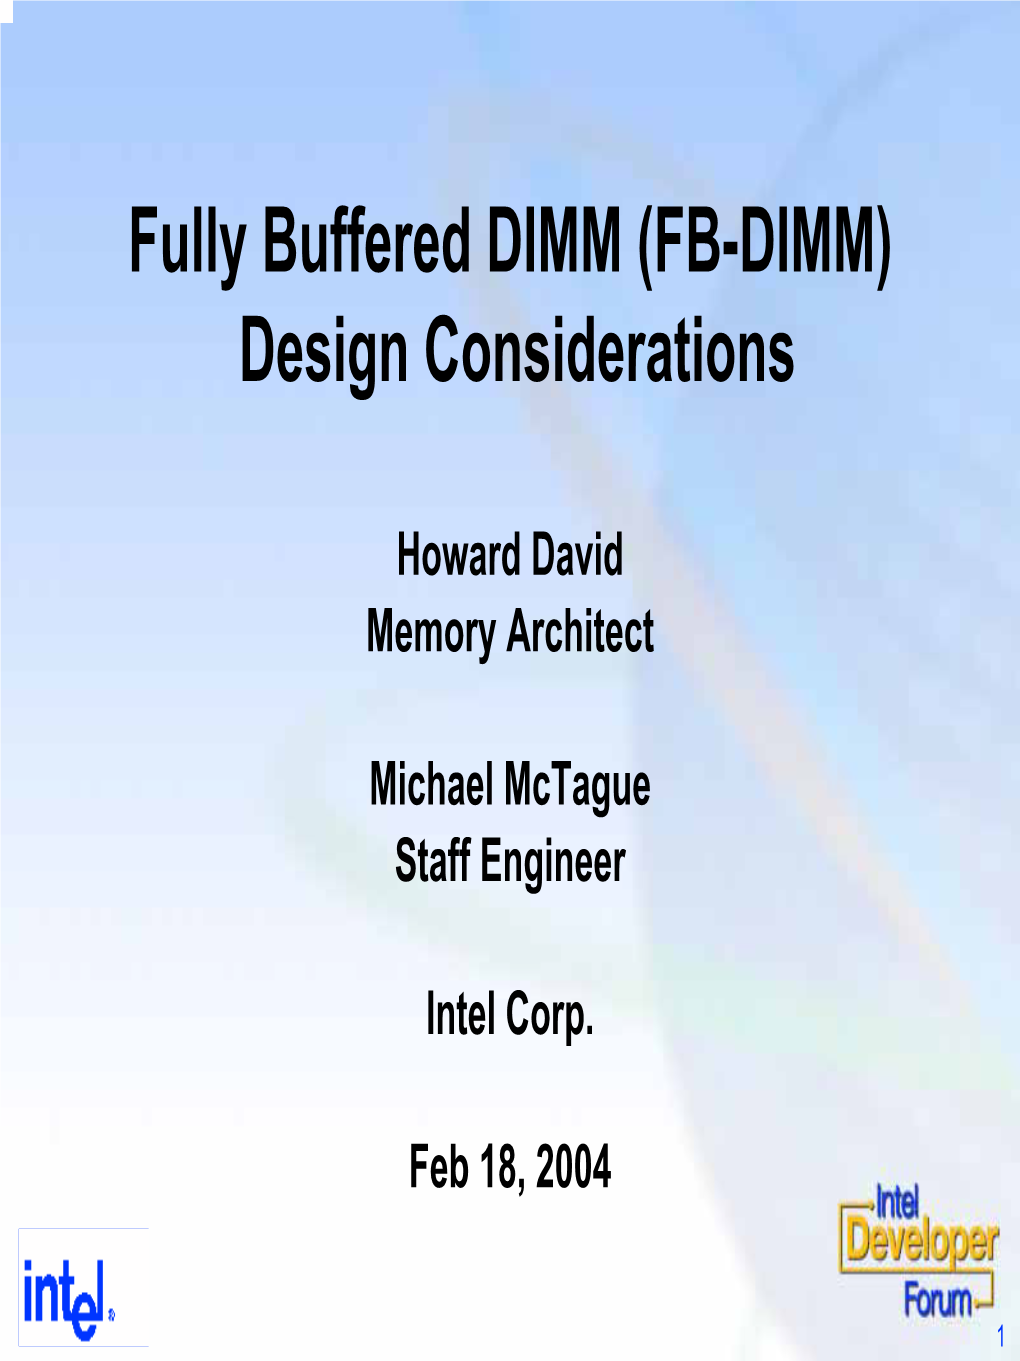 Fully Buffered DIMM (FB-DIMM) Design Considerations